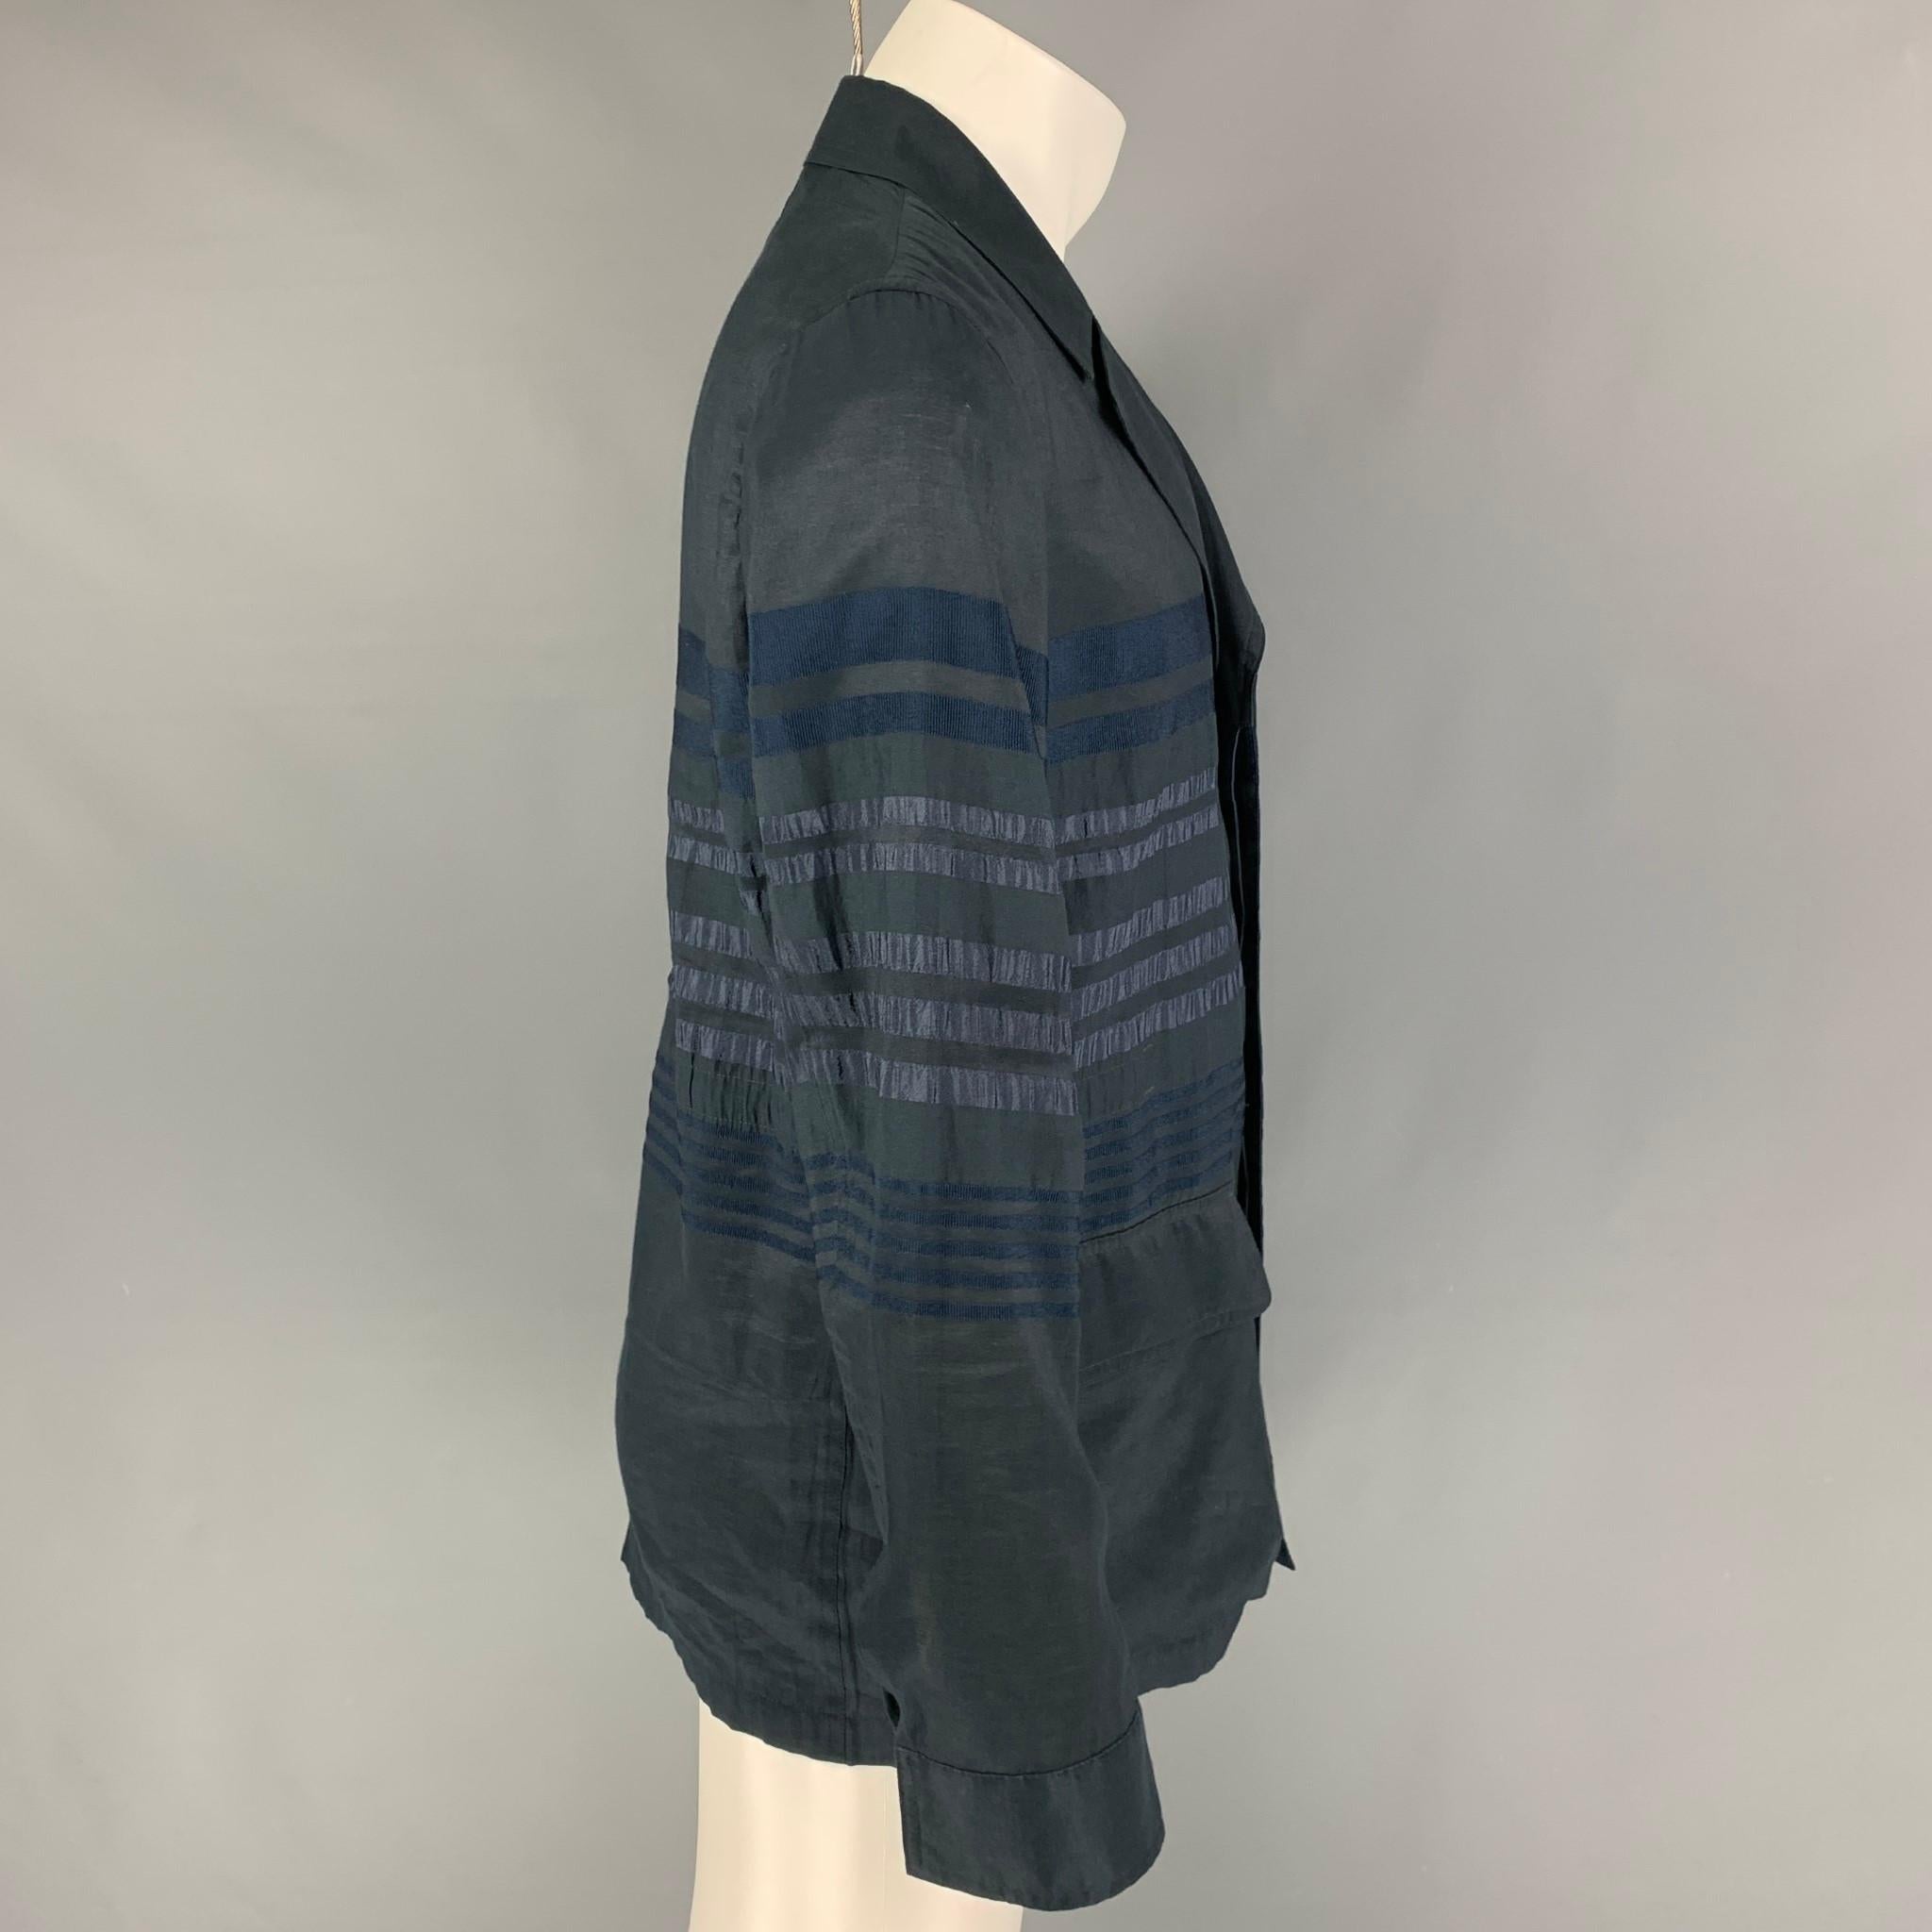 TOMORROWLAND sport coat comes in a dark blue shimmery stripe cotton featuring a notch lapel, flap pockets, and a hidden placket closure. 

Very Good Pre-Owned Condition.
Marked: M

Measurements:

Shoulder: 17.5 in.
Chest: 40 in.
Sleeve: 26 in.   